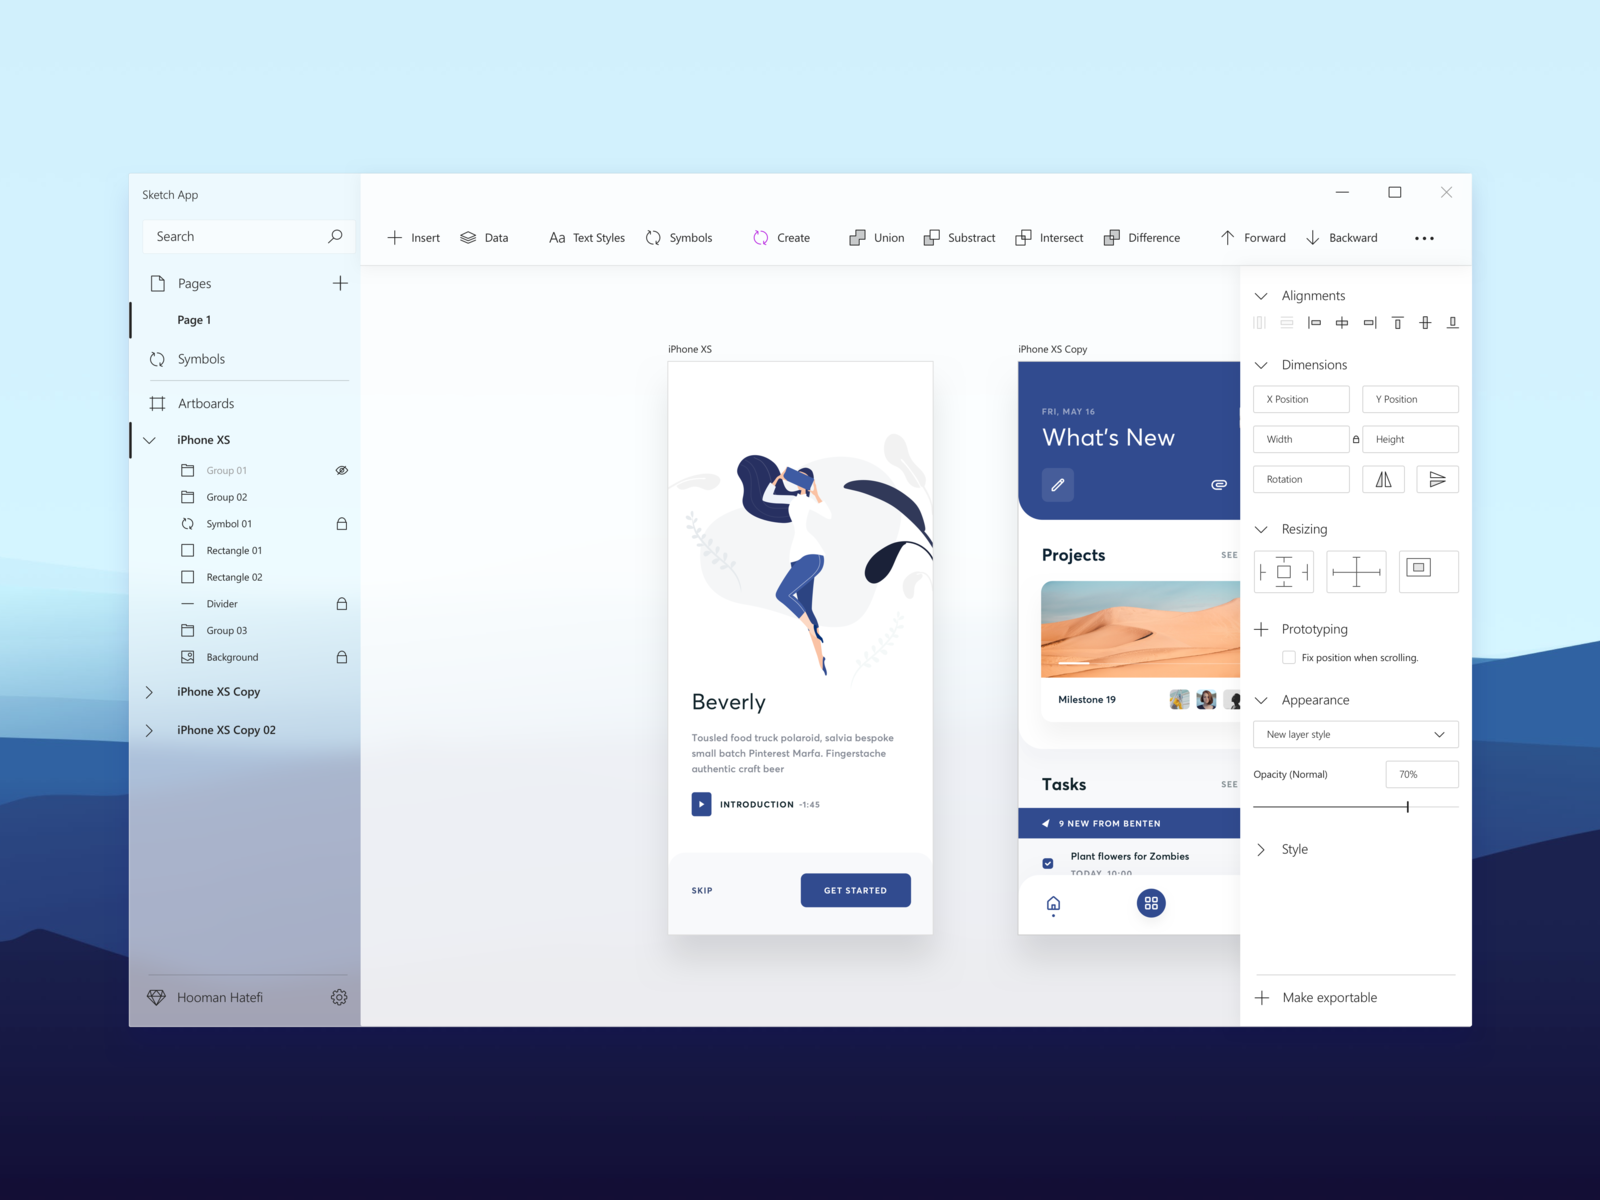 Fluent Design Assets for your Office and Microsoft 365 user interface  N8D